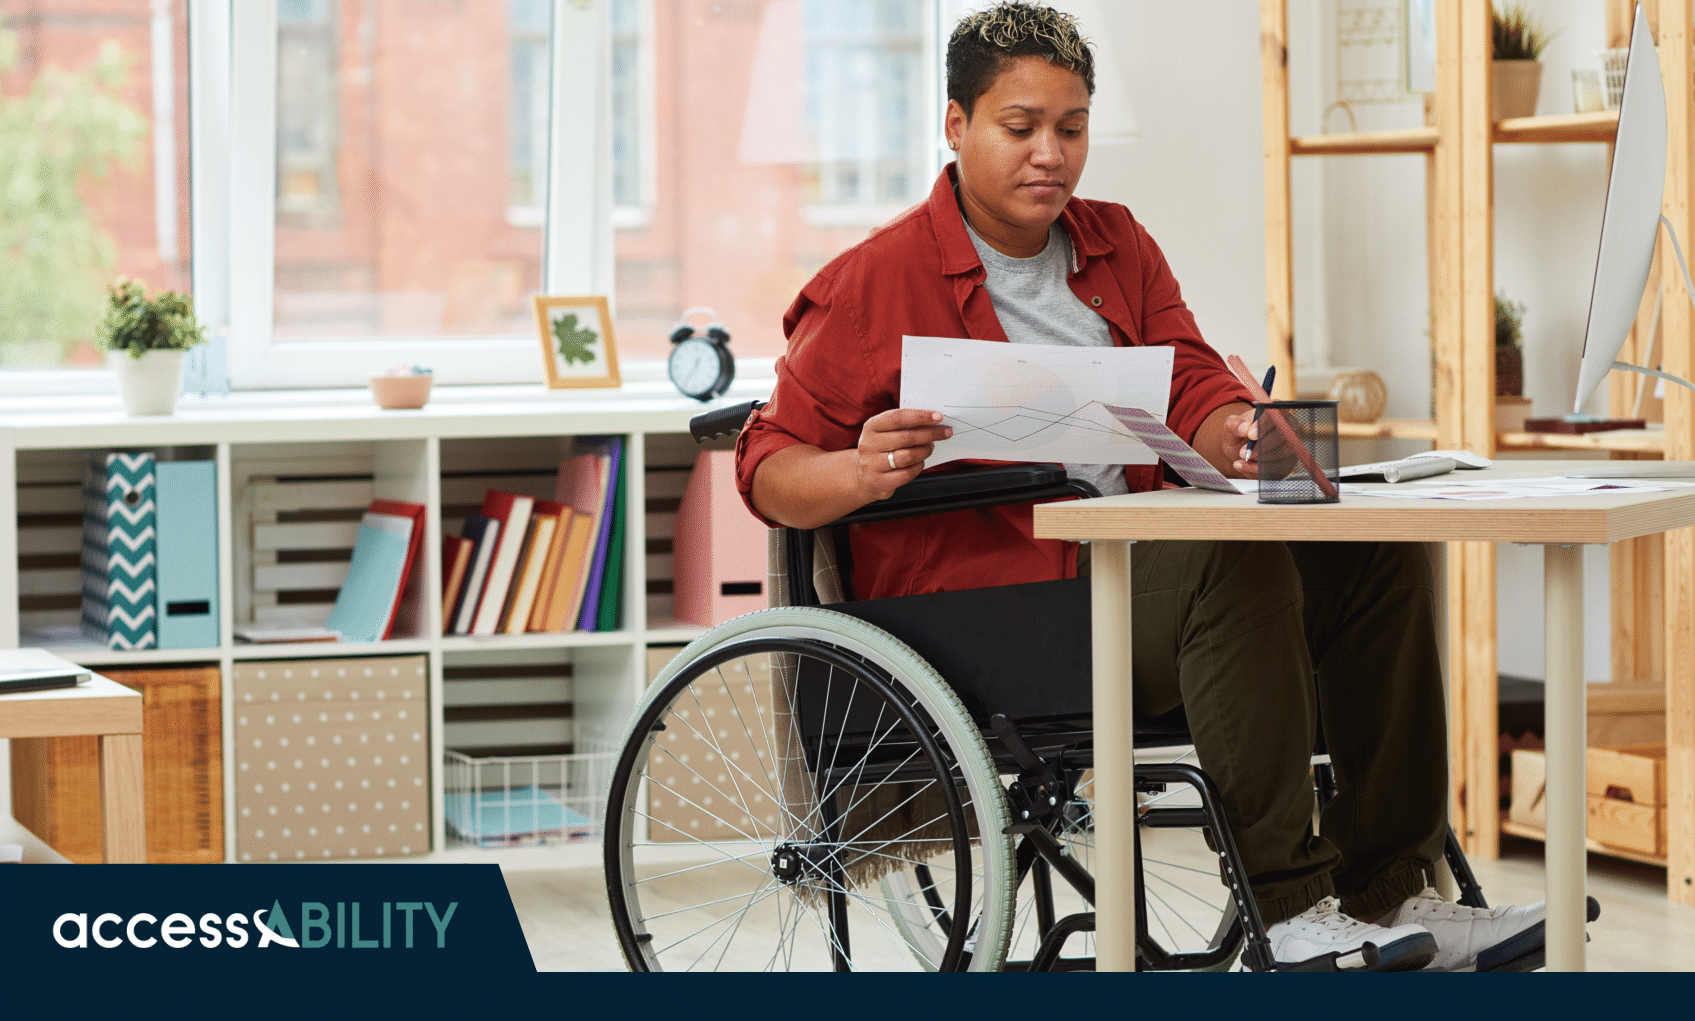 accessABILITY advocates on behalf of people with disabilities to exercise their rights to establish and maintain control over their lives.